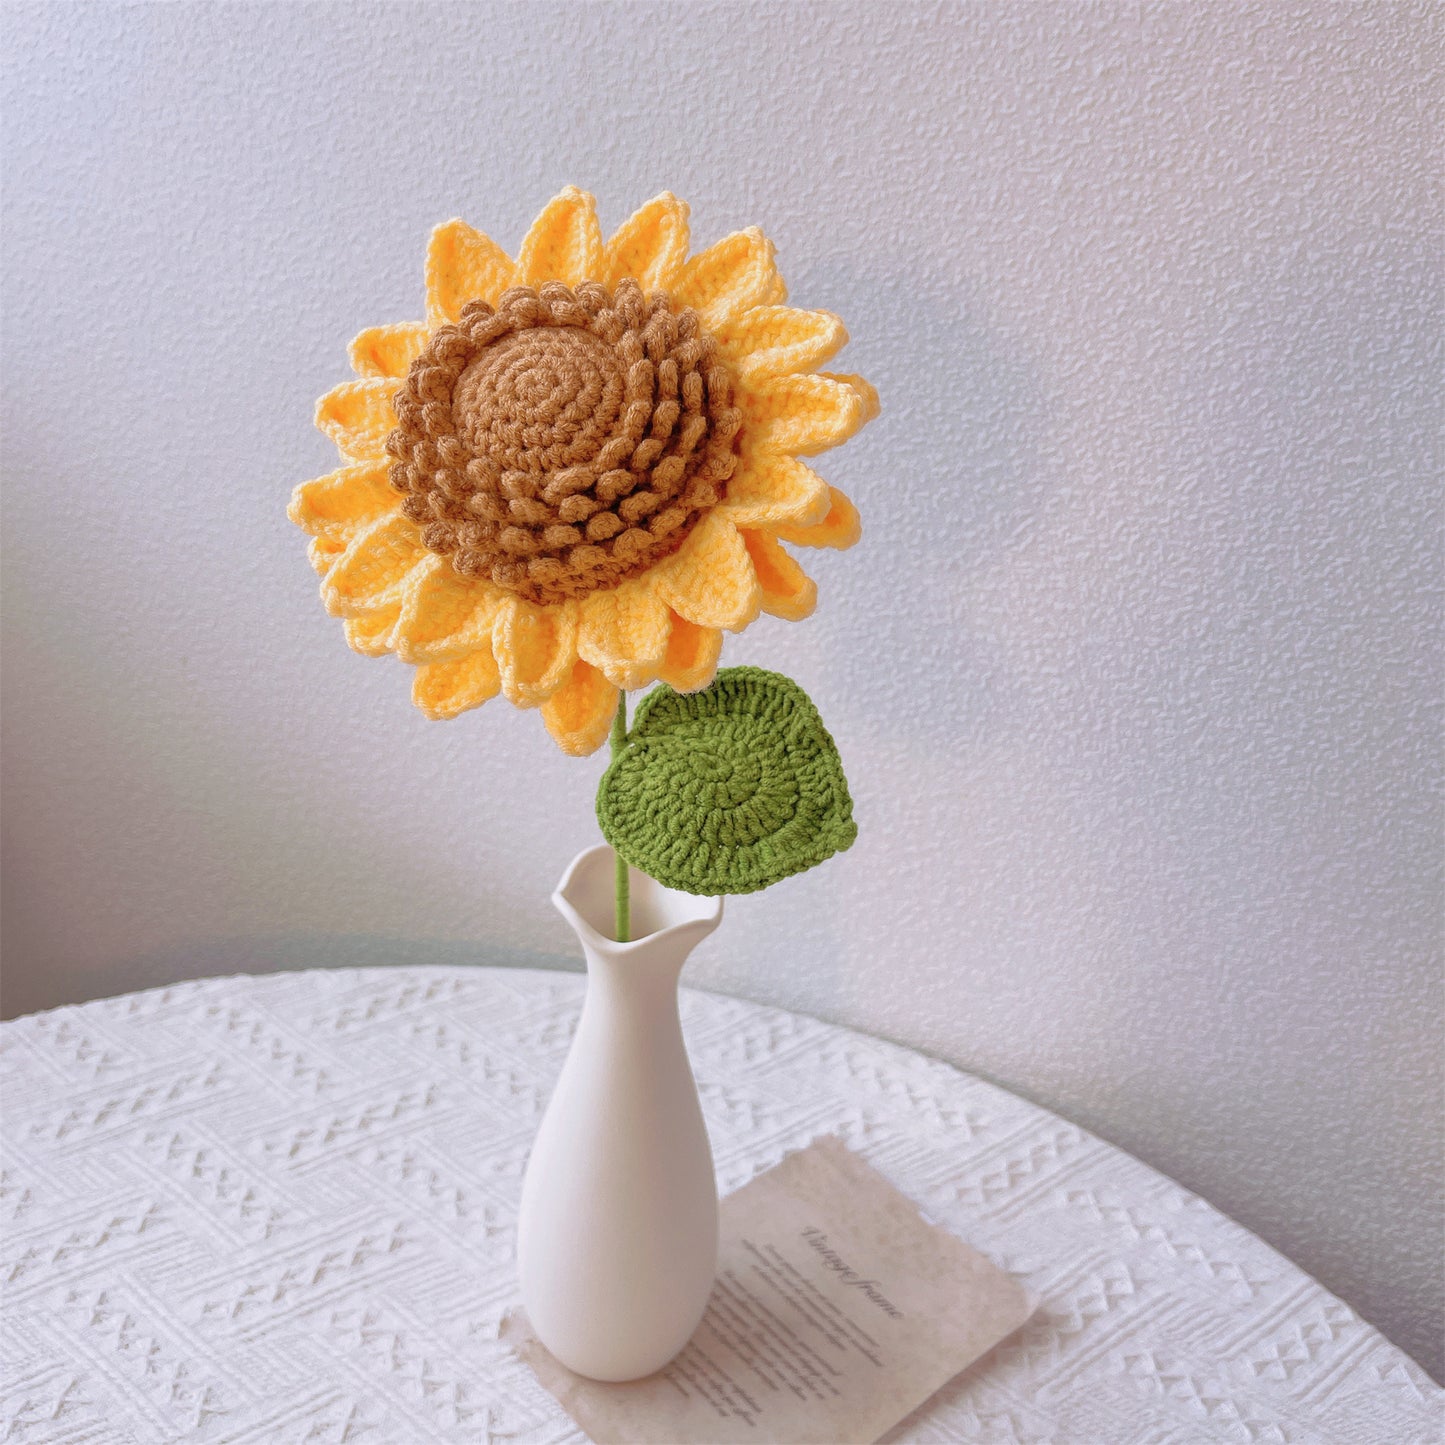 Handmade Crocheted Spring Theme Bouquet of Sunflowers, Eucalyptus Leaves, and Colorful Bee - A Unique GIFT for Any Occasion